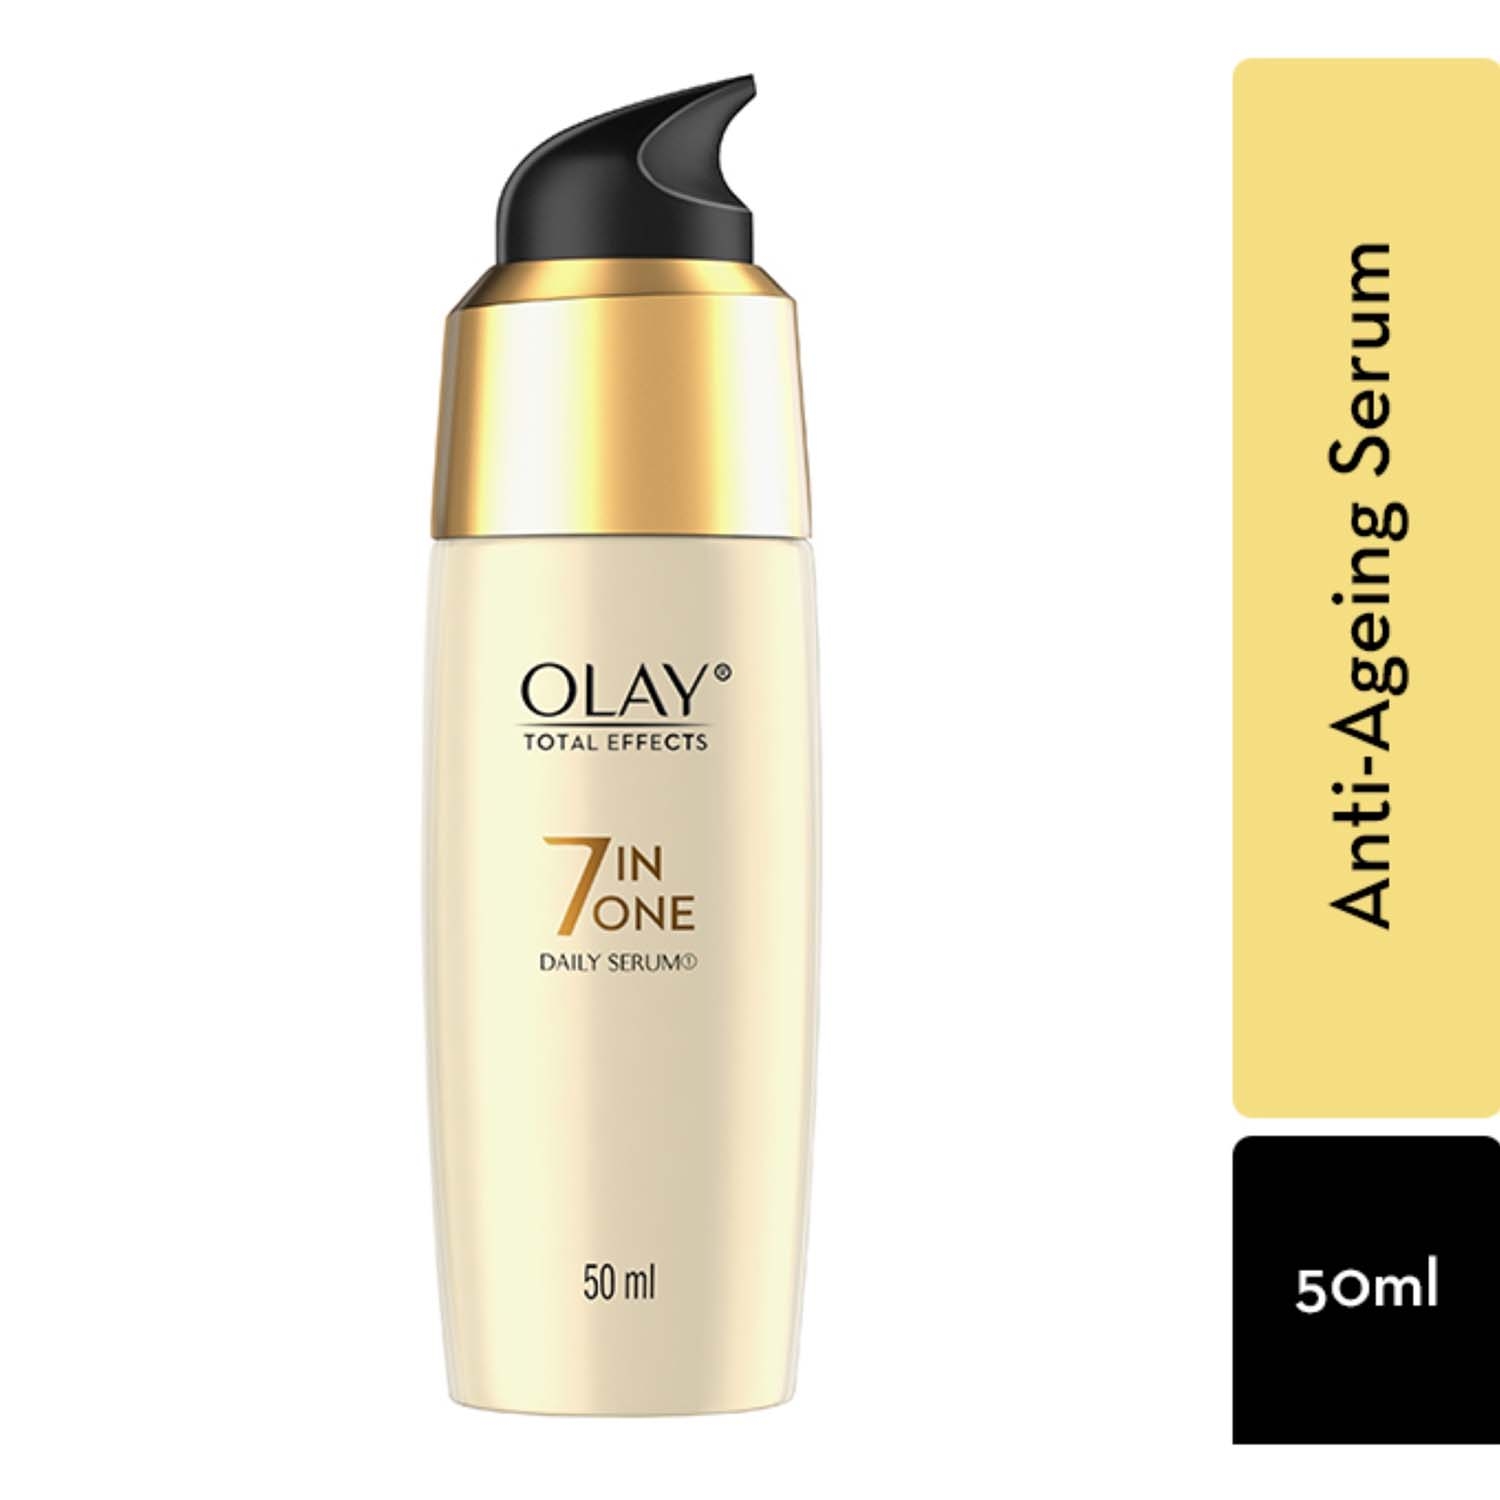 Olay | Olay 7-In-1 Total Effects Serum (50ml)